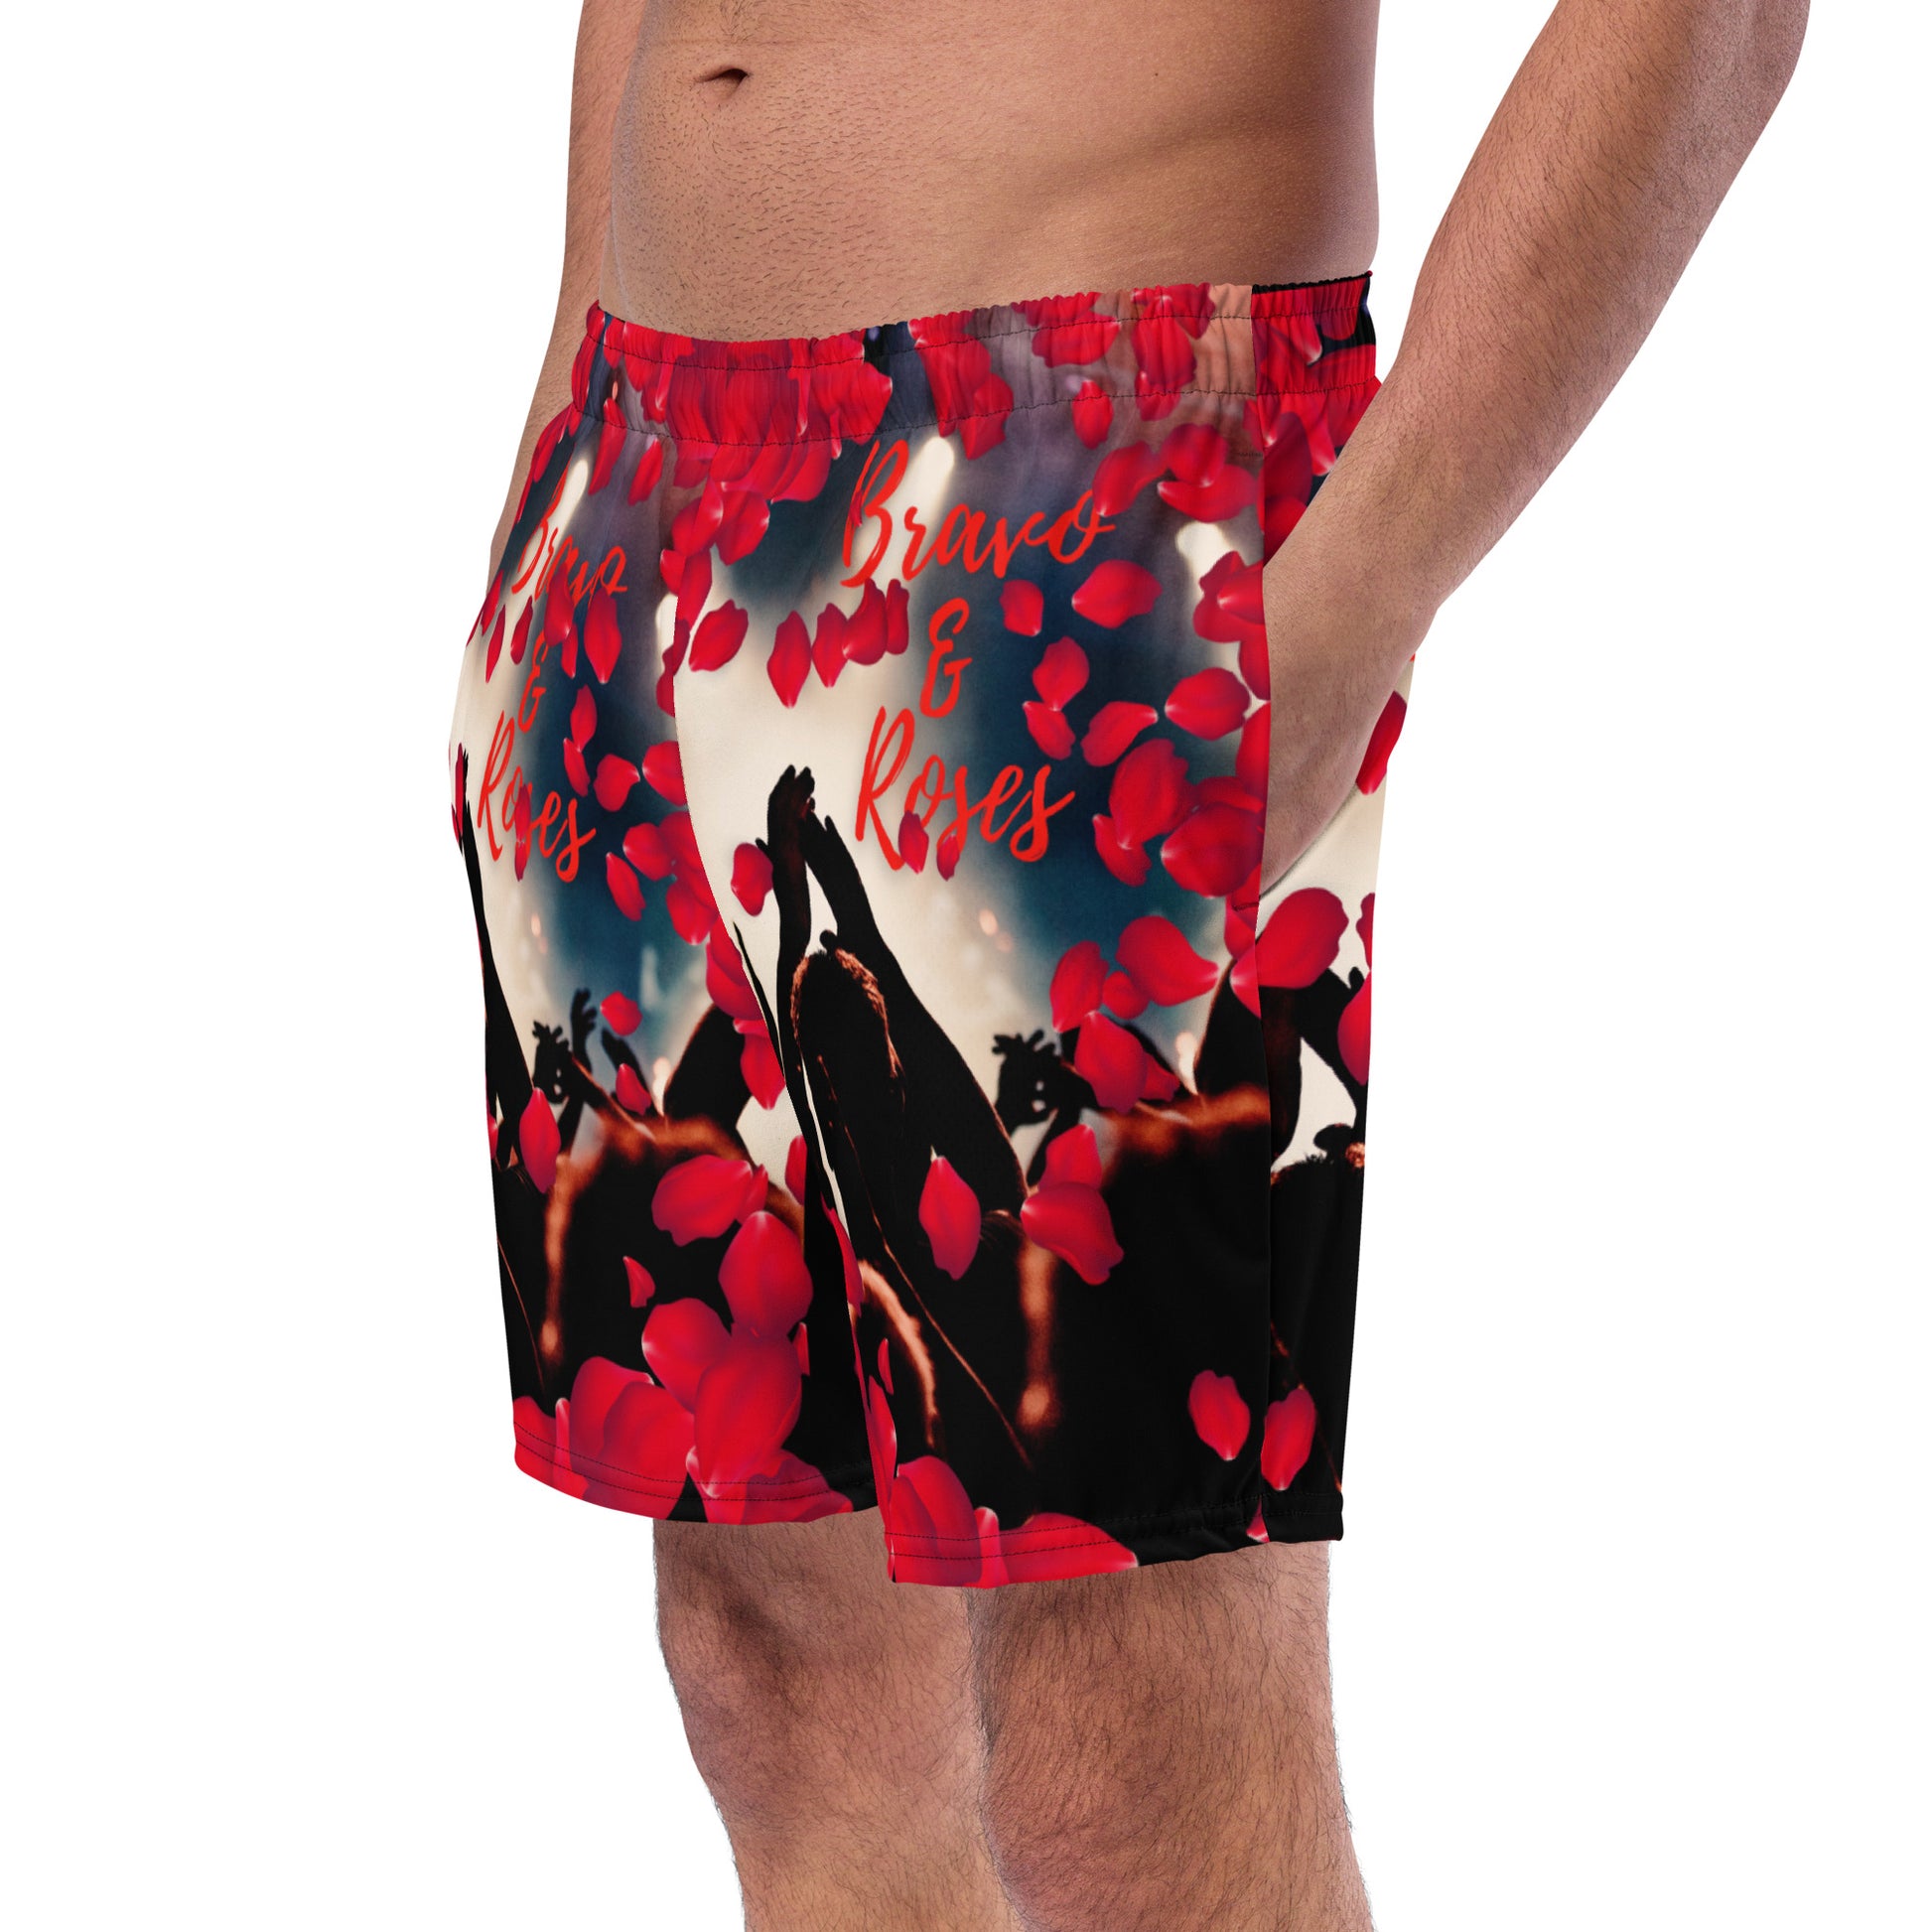 Emote Merch from SpotlYght Seeker - Bravo and Roses dynamic swim trunks for the Male  Artist because artists deserve praise.